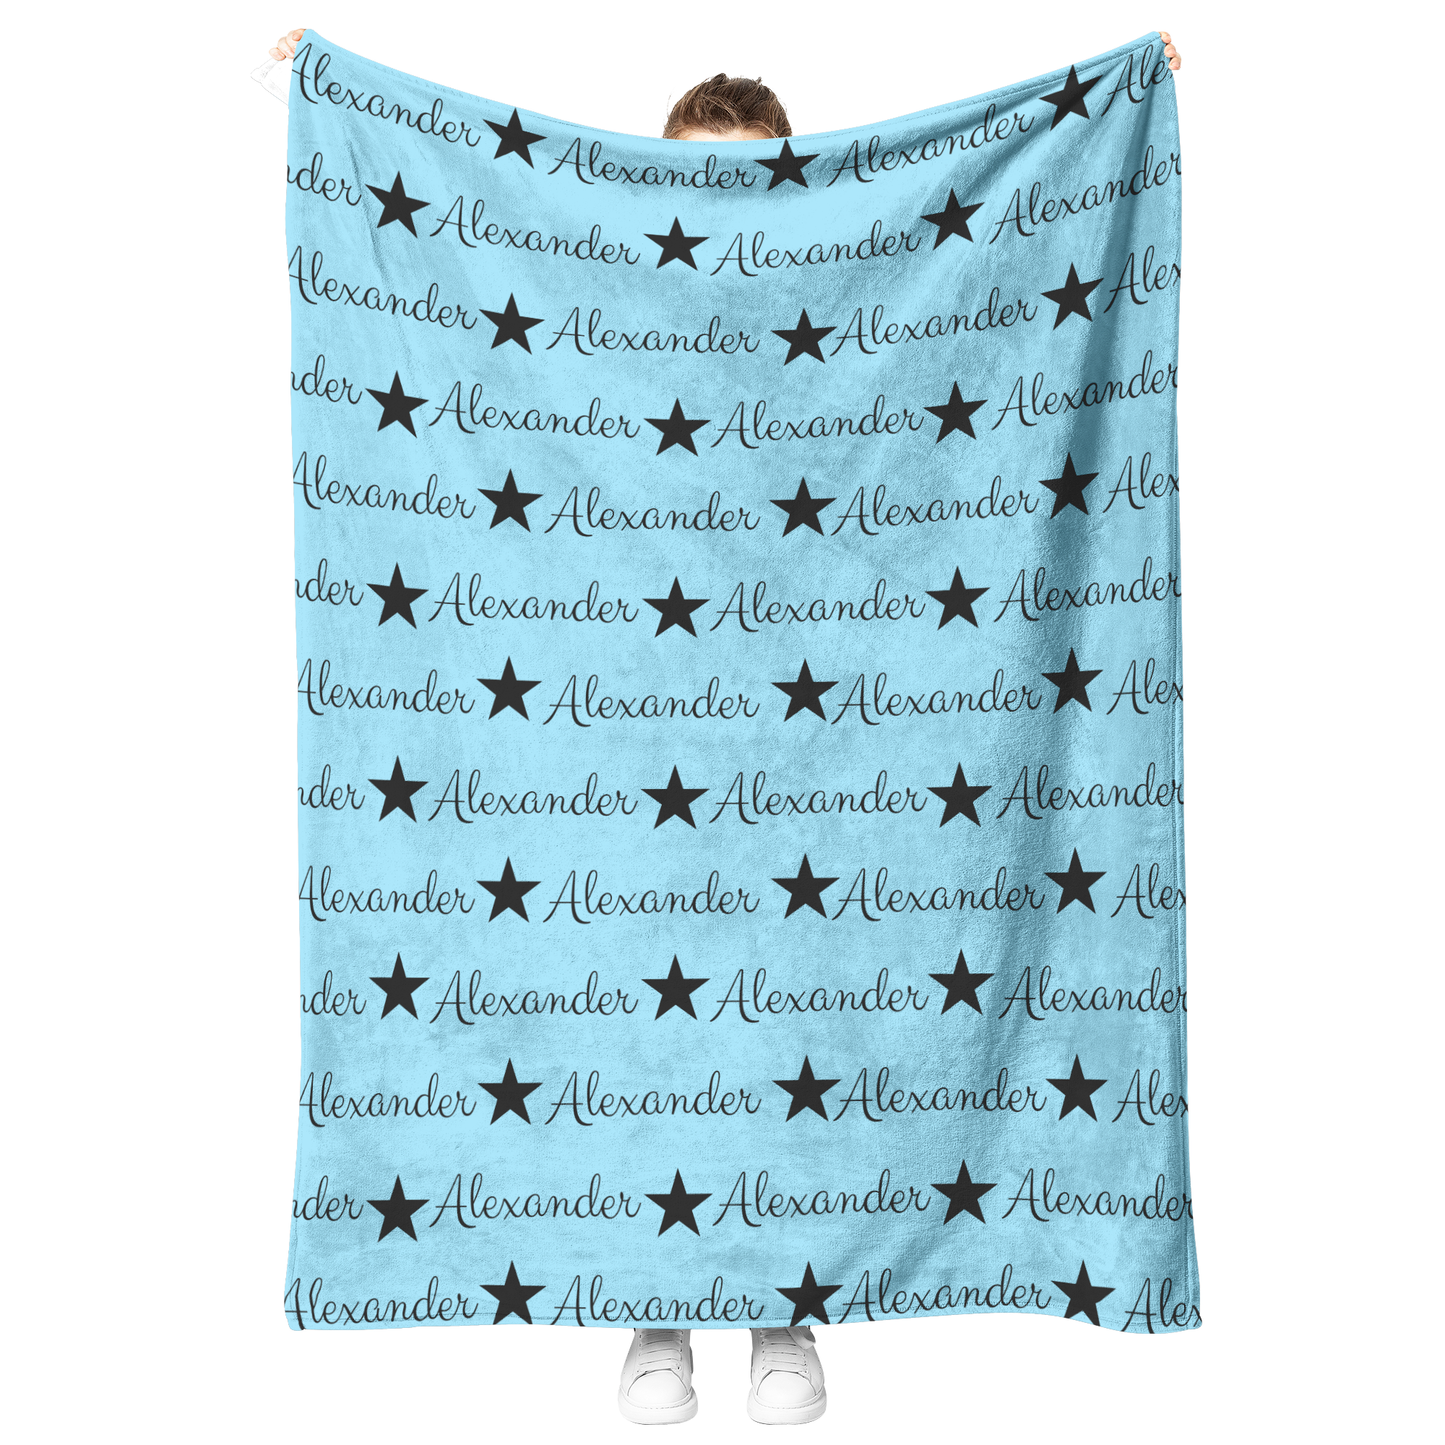 Get trendy with Name Blanket Blanket: Fleece/Sherpa -  available at Good Gift Company. Grab yours for $21 today!